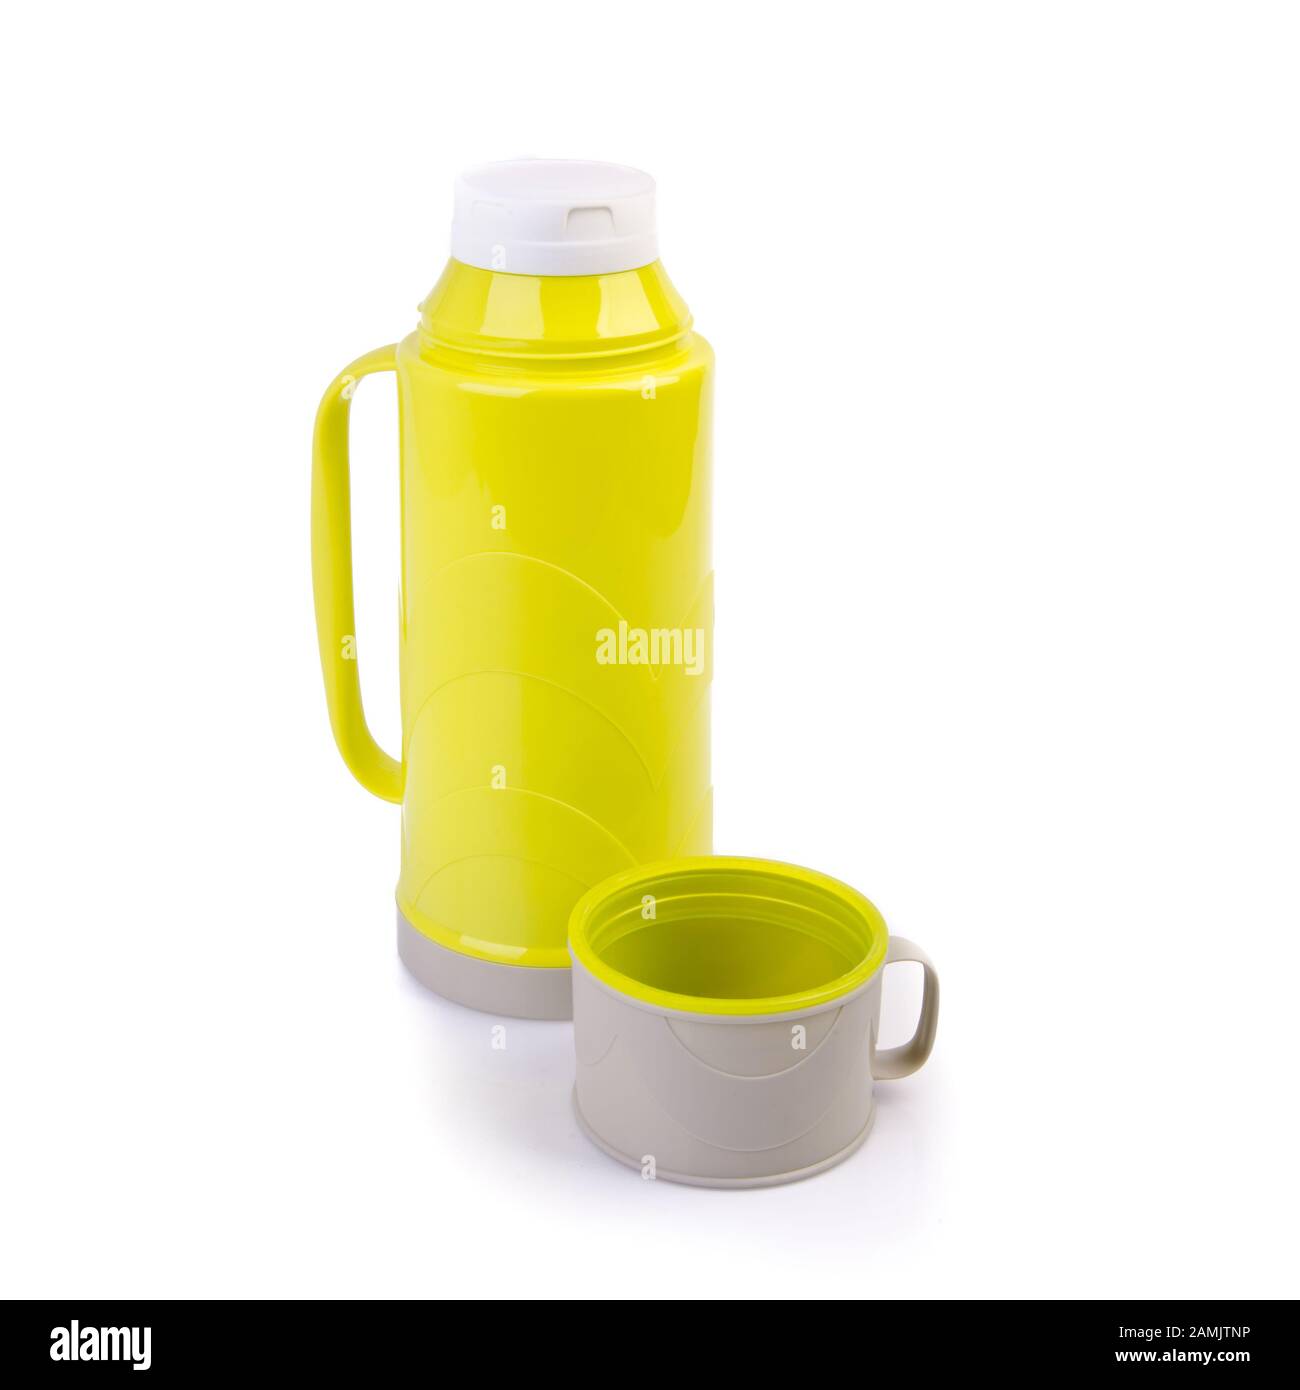 Thermo or Plastic Thermos flask on background new Stock Photo - Alamy